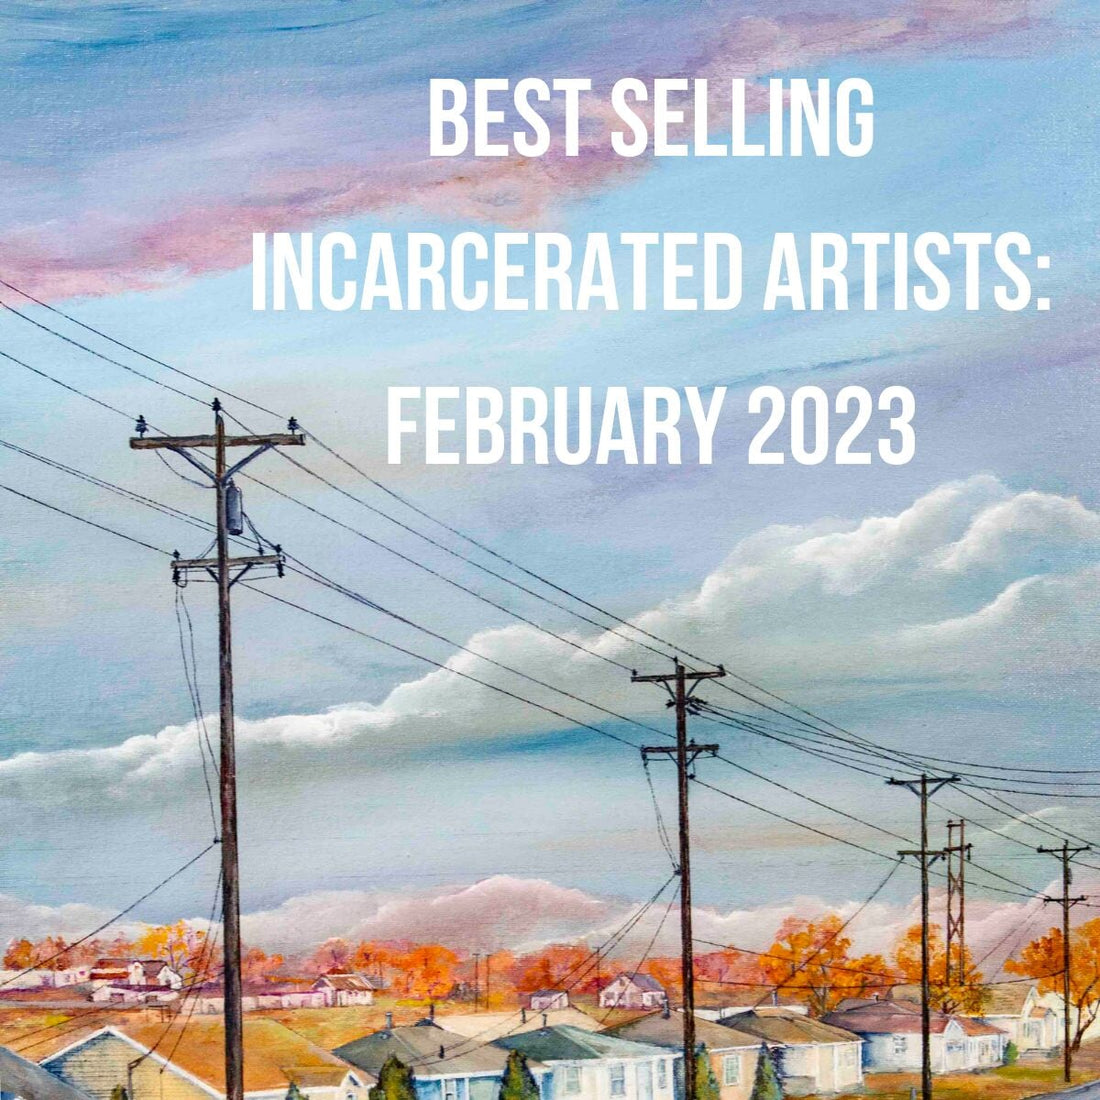 Collector Favorite: Bestselling incarcerated artists February 2023